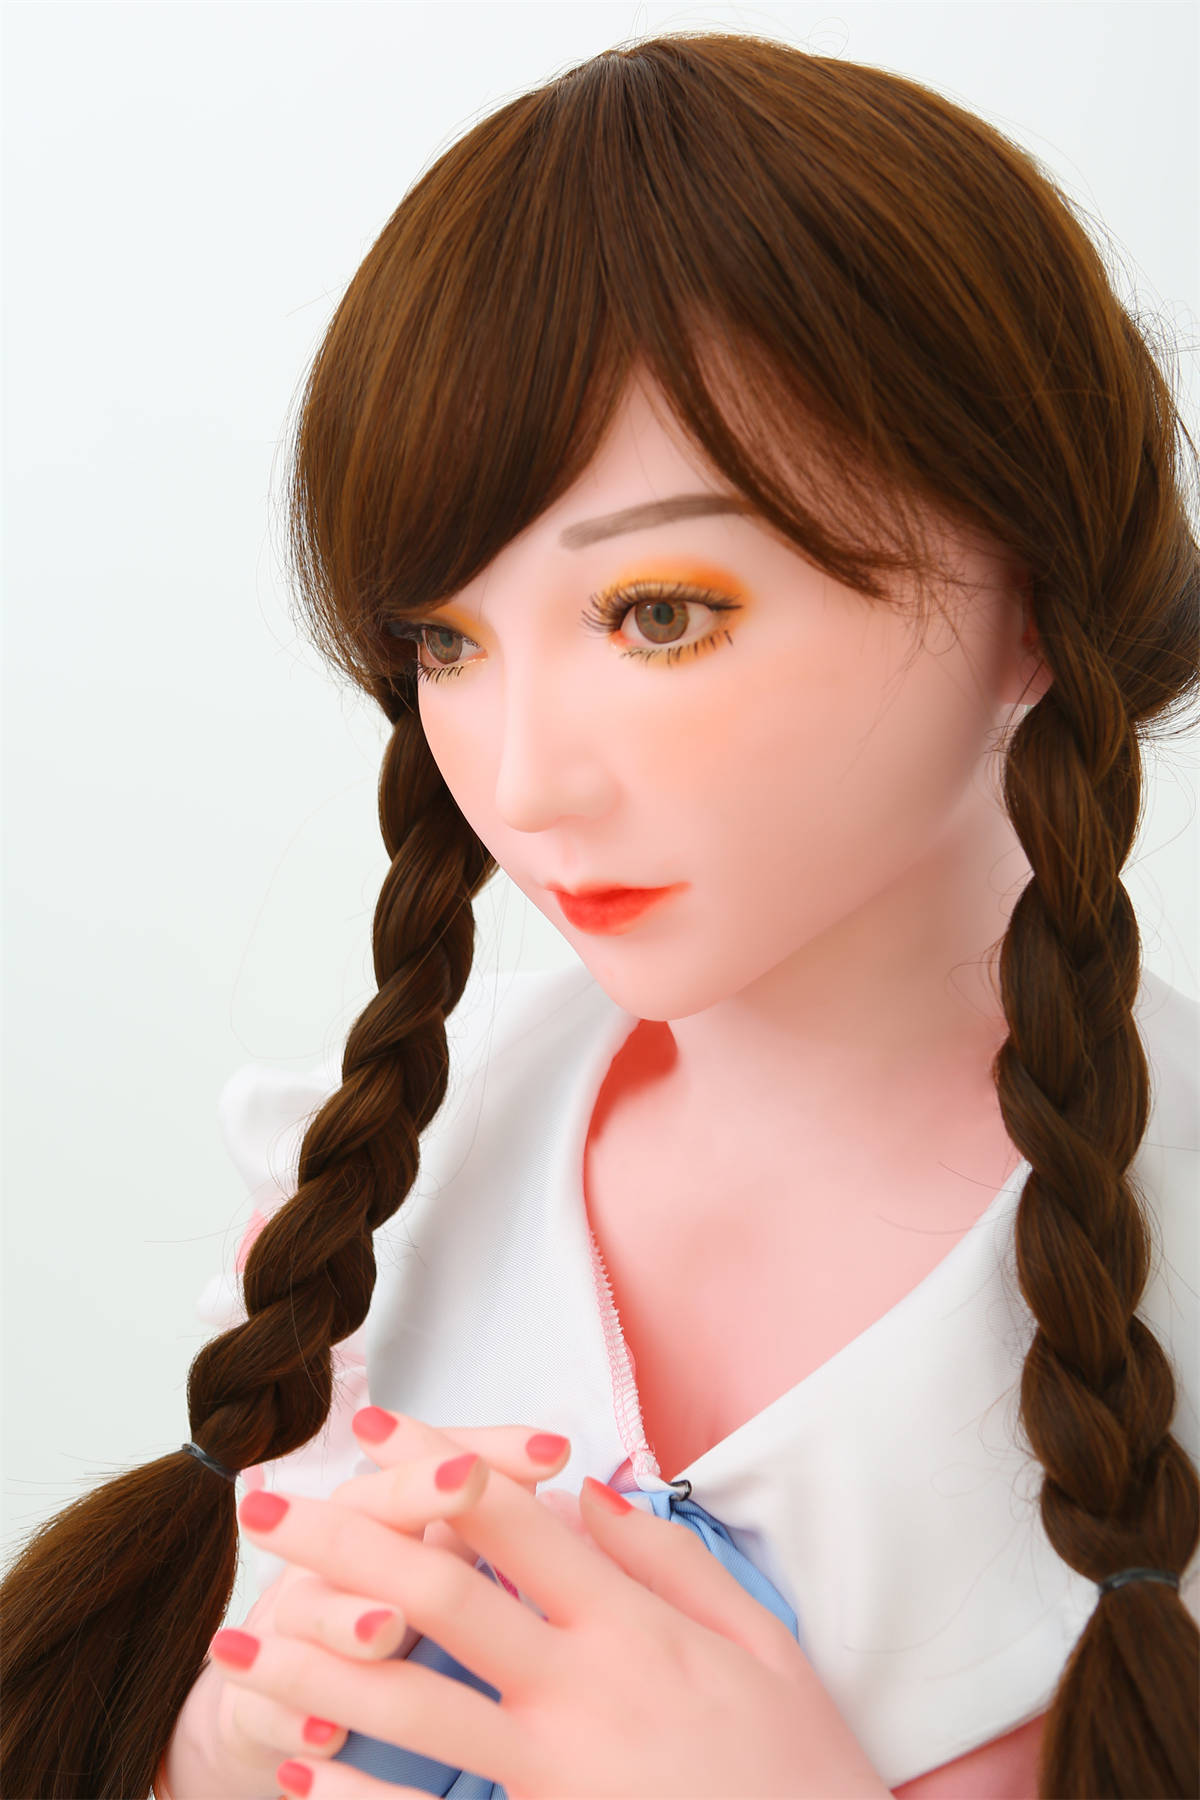 Cheap Wholesale Price Japanese Real Inflatable Silicone Sex Doll  (11)